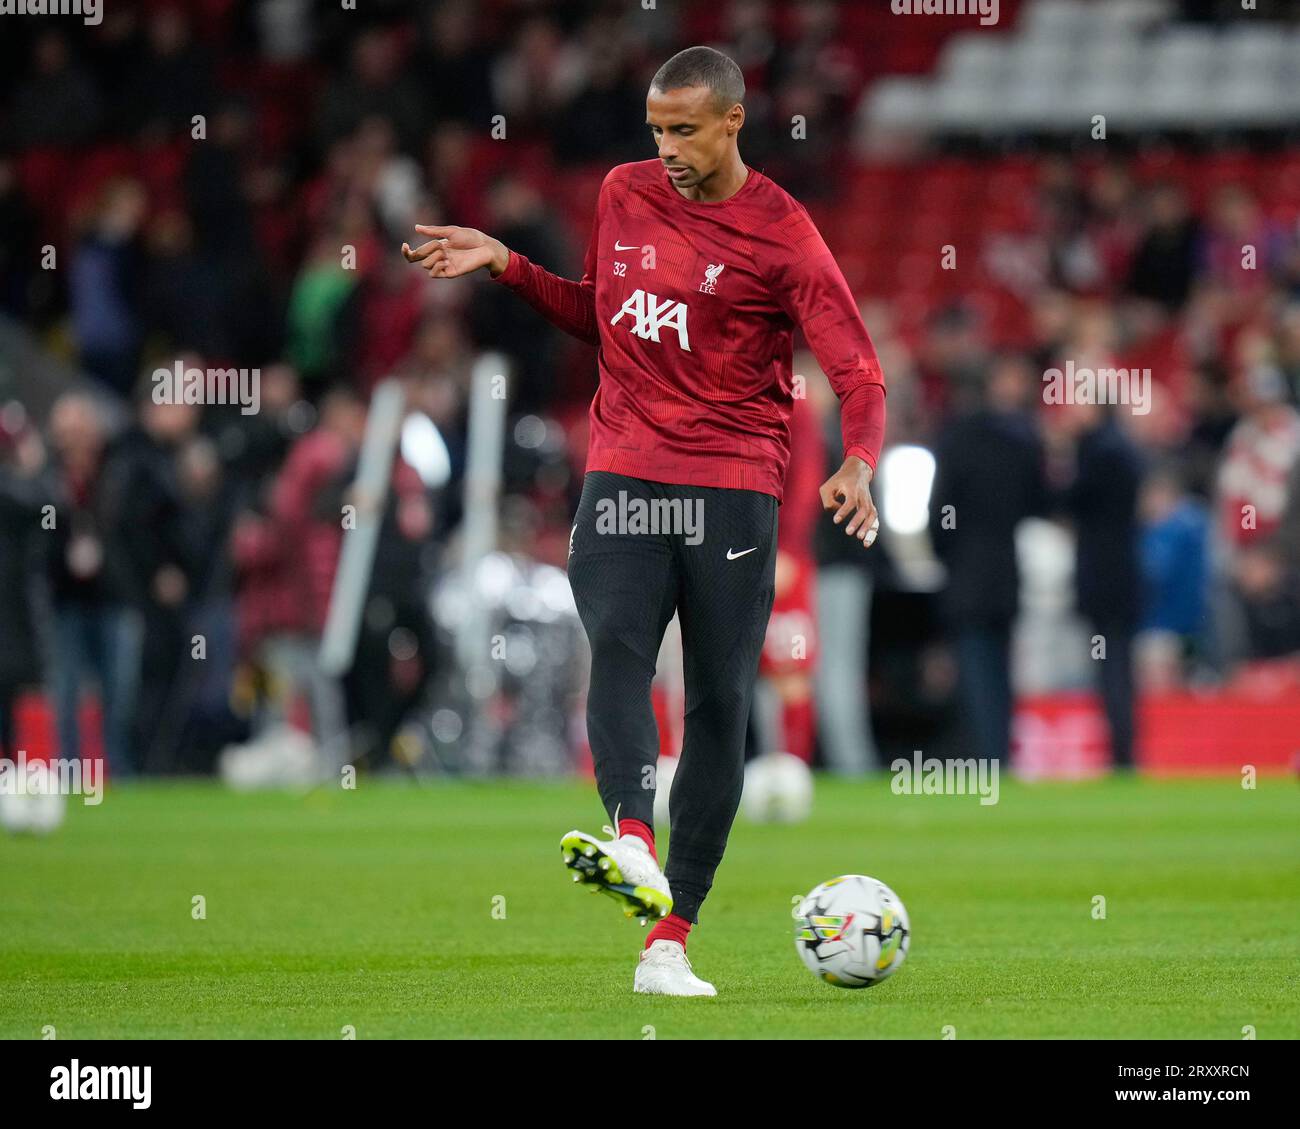 Joel Matip #32 of Liverpool warms up before the Carabao Cup Third Round match Liverpool vs Leicester City at Anfield, Liverpool, United Kingdom, 27th September 2023  (Photo by Steve Flynn/News Images) Stock Photo